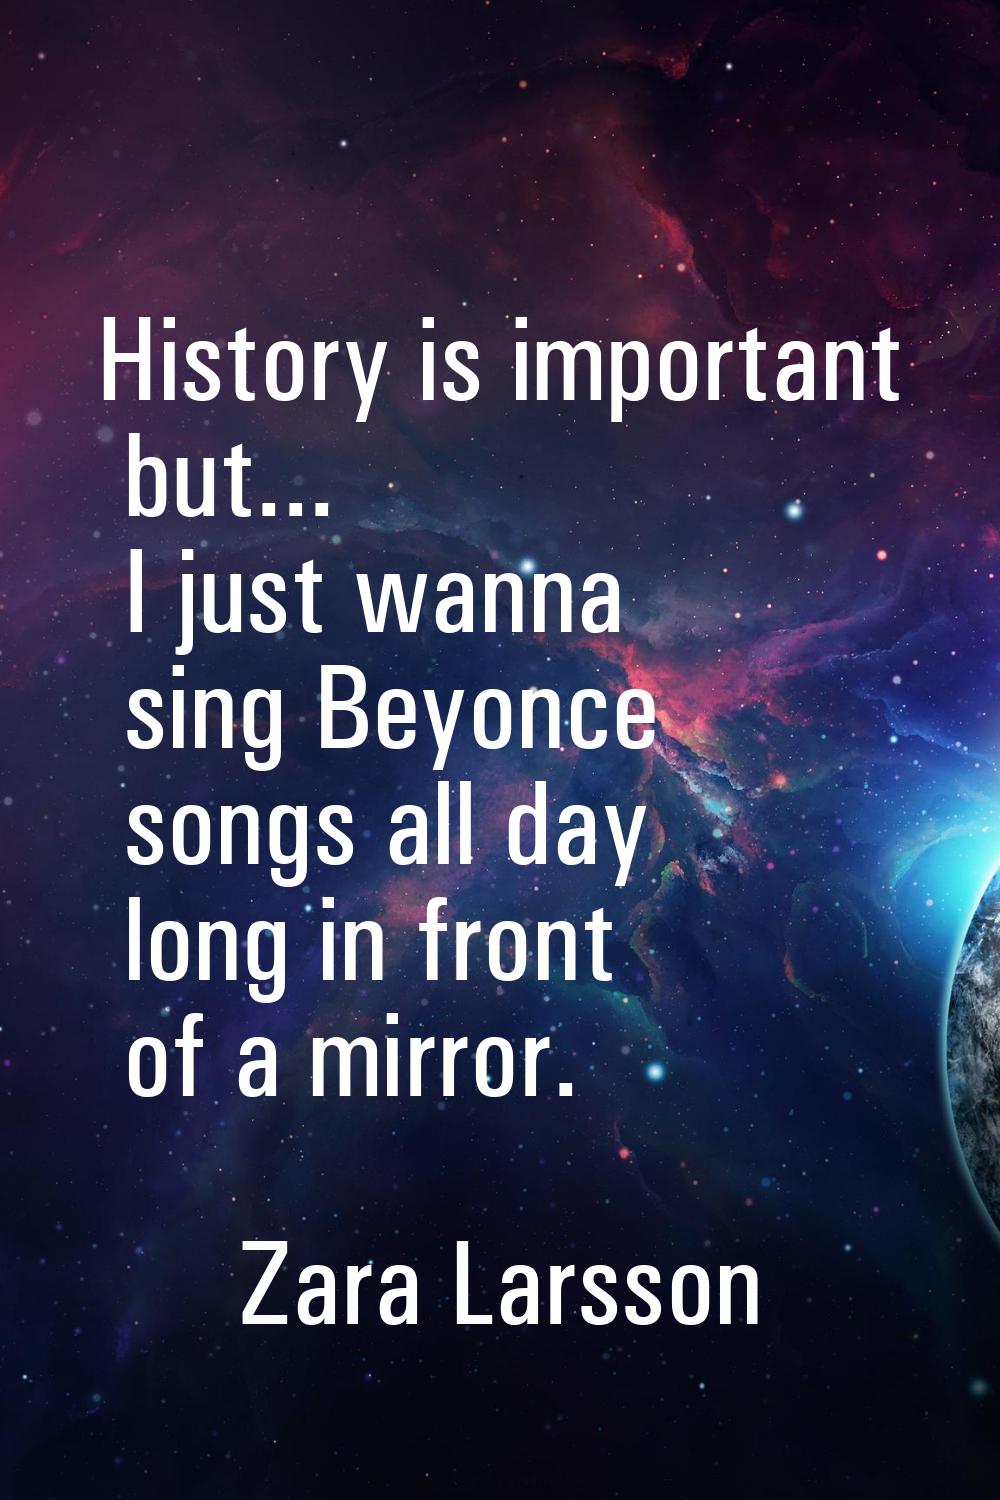 History is important but... I just wanna sing Beyonce songs all day long in front of a mirror.